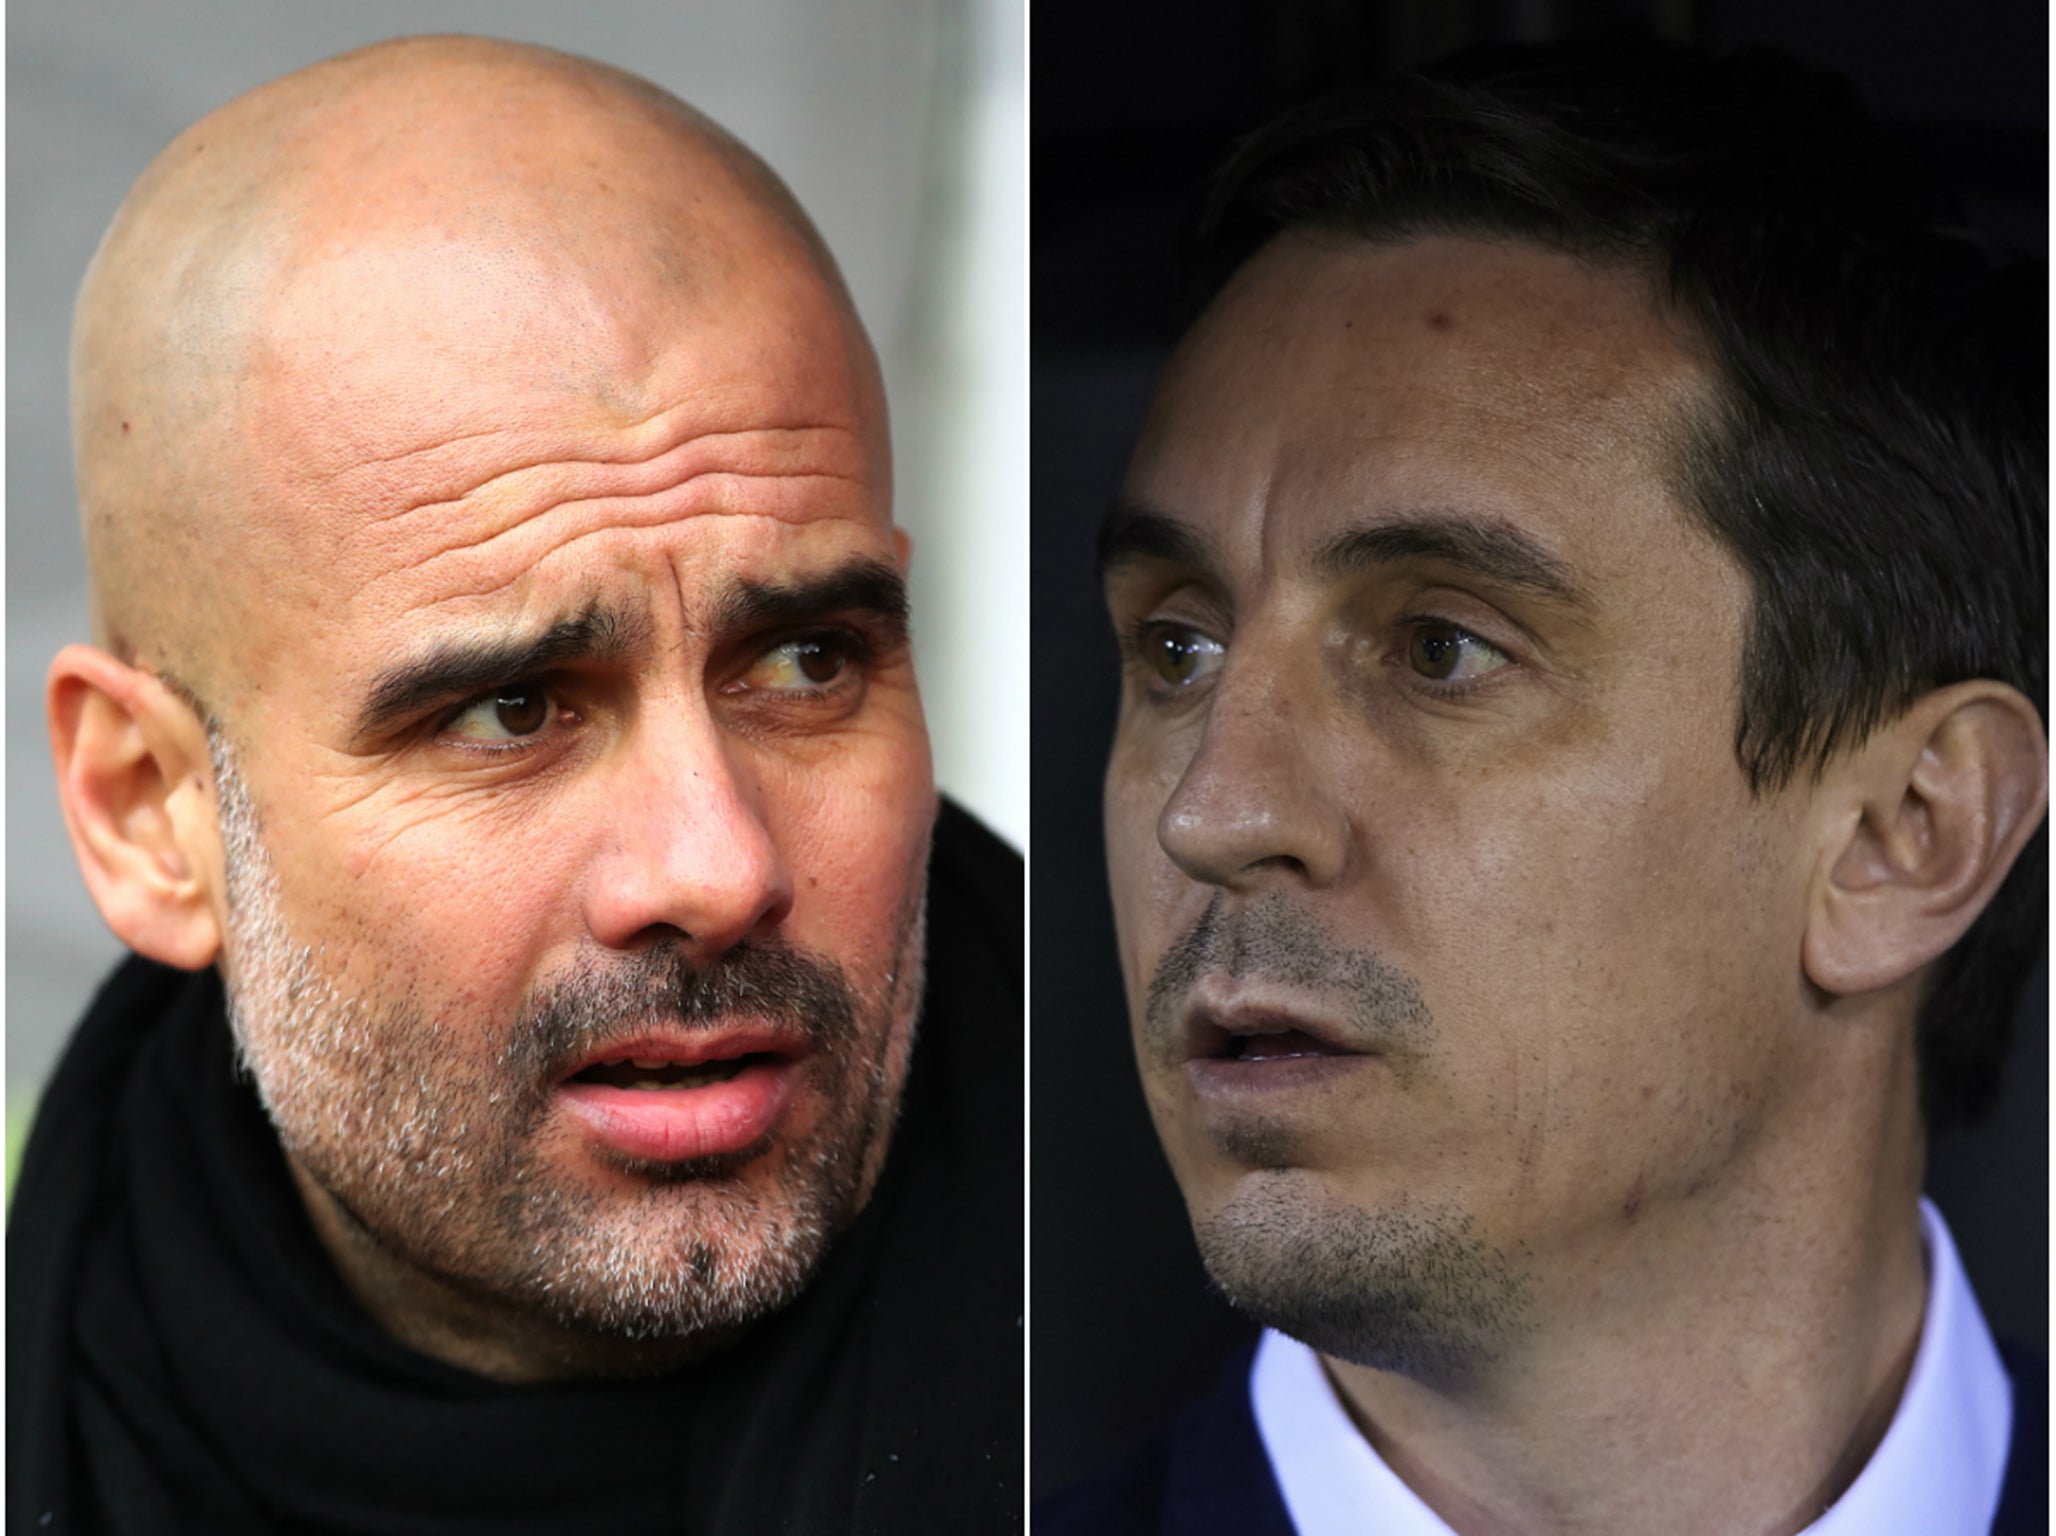 Pep Guardiola hits back at Gary Neville over criticism of Manchester City subs bench decision